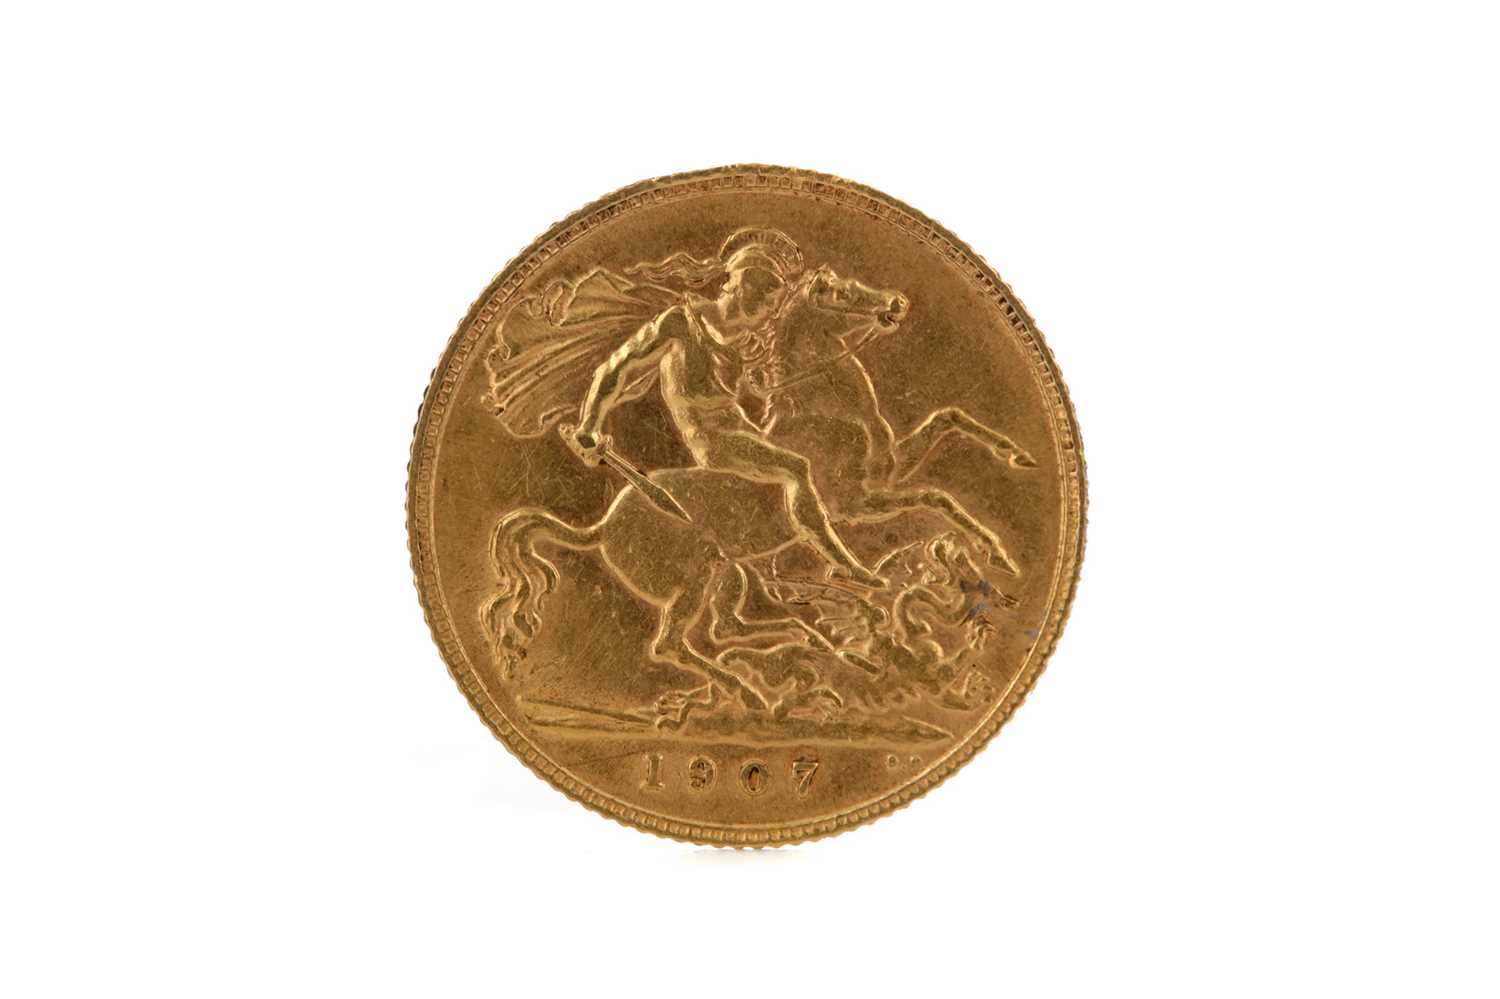 Lot 60 - A GOLD HALF SOVEREIGN DATED 1907